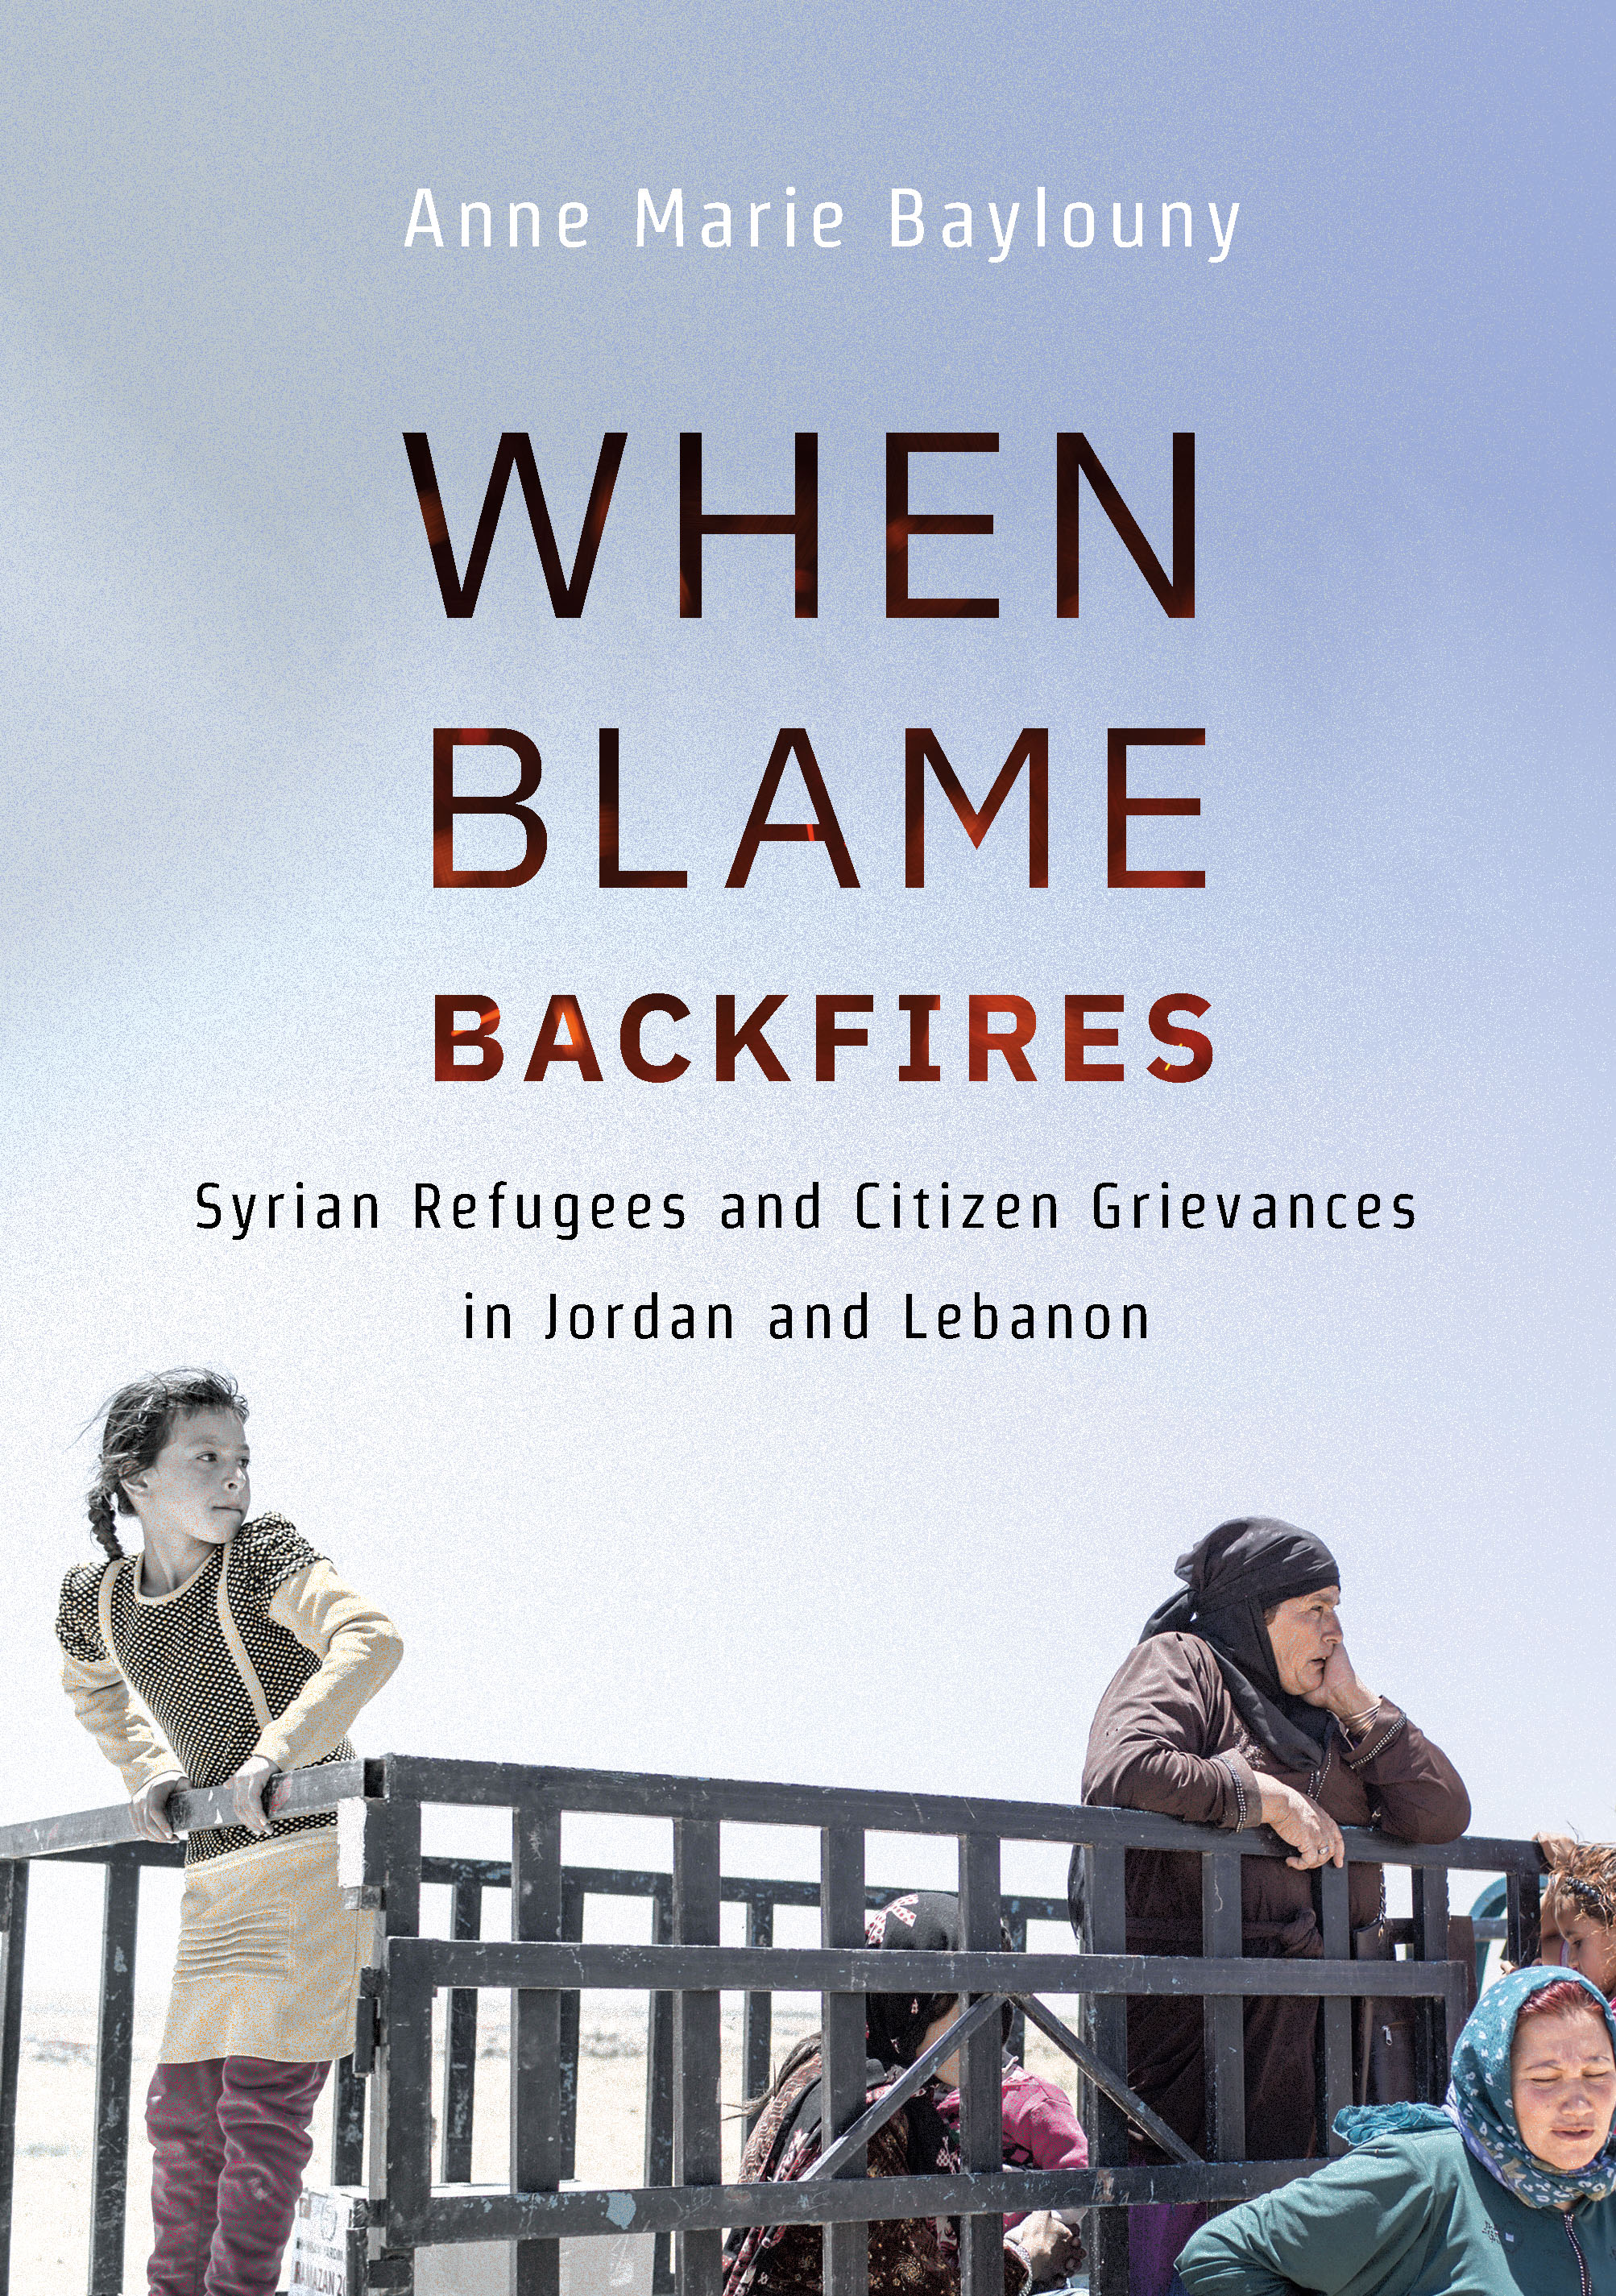 Picture of Syrian refugees, When Blame Backfires book cover